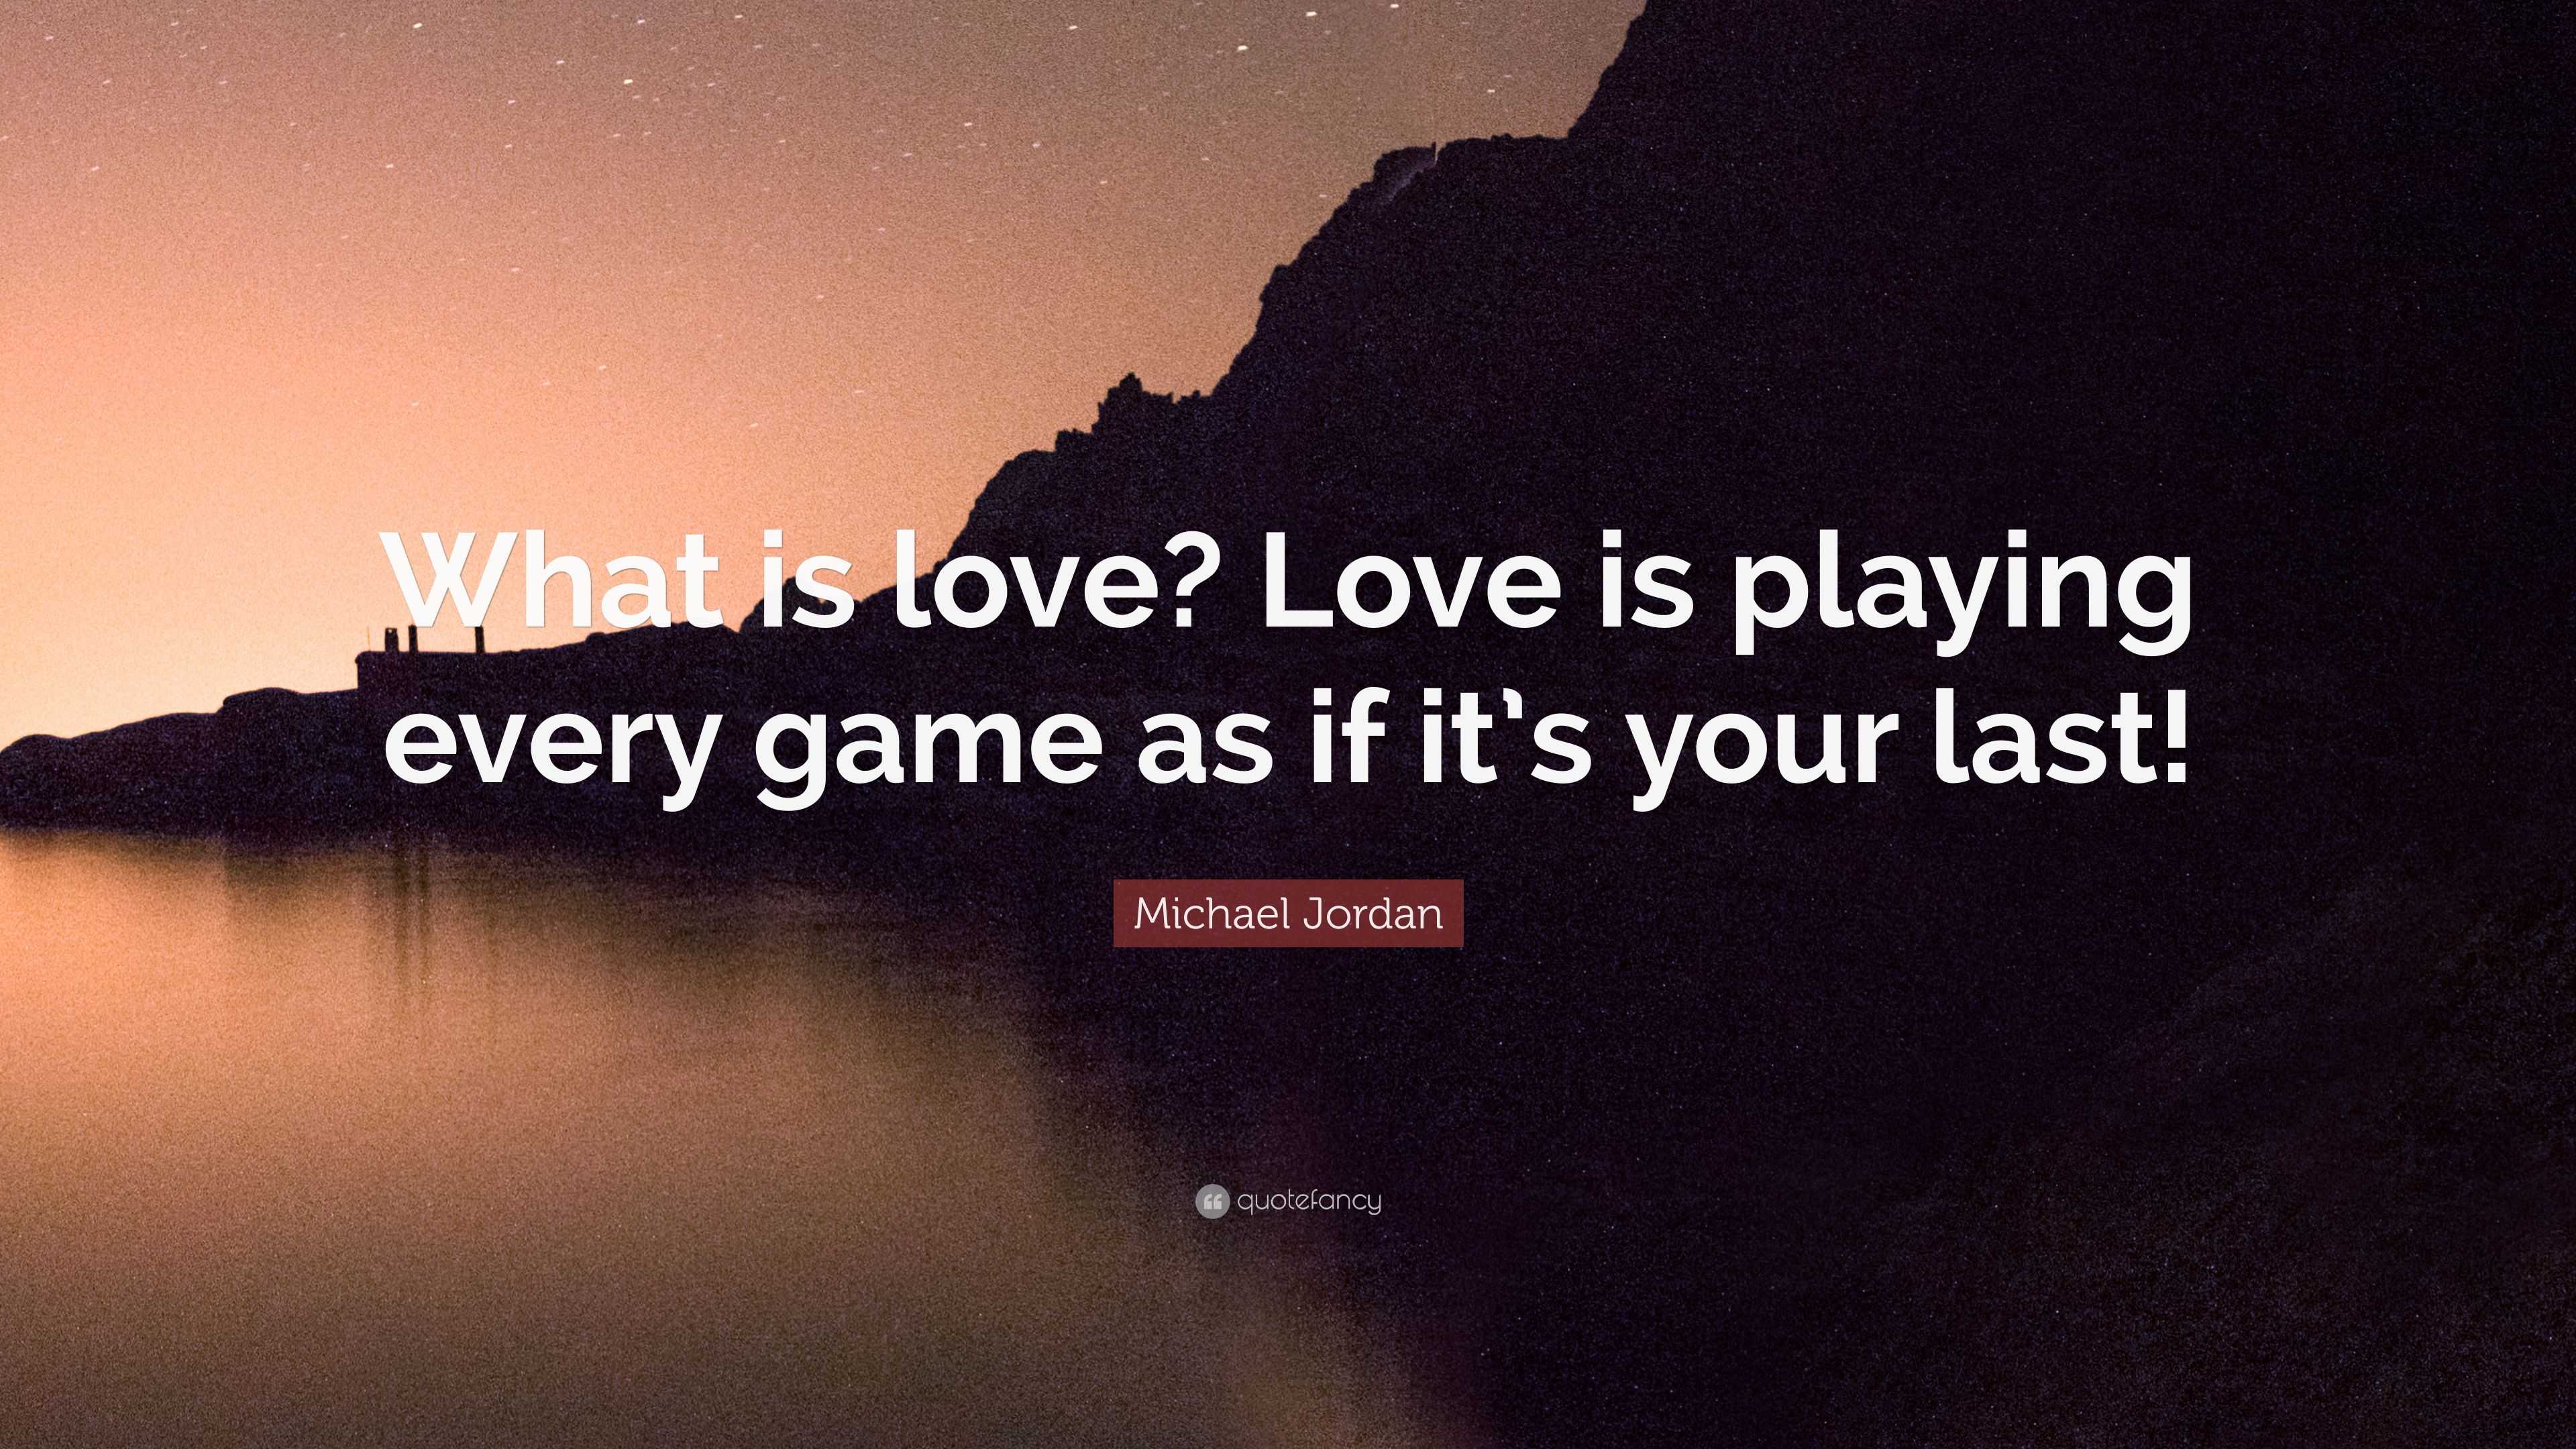 Michael Jordan Quote: "What is love? Love is playing every game as if it's your last!" (12 ...